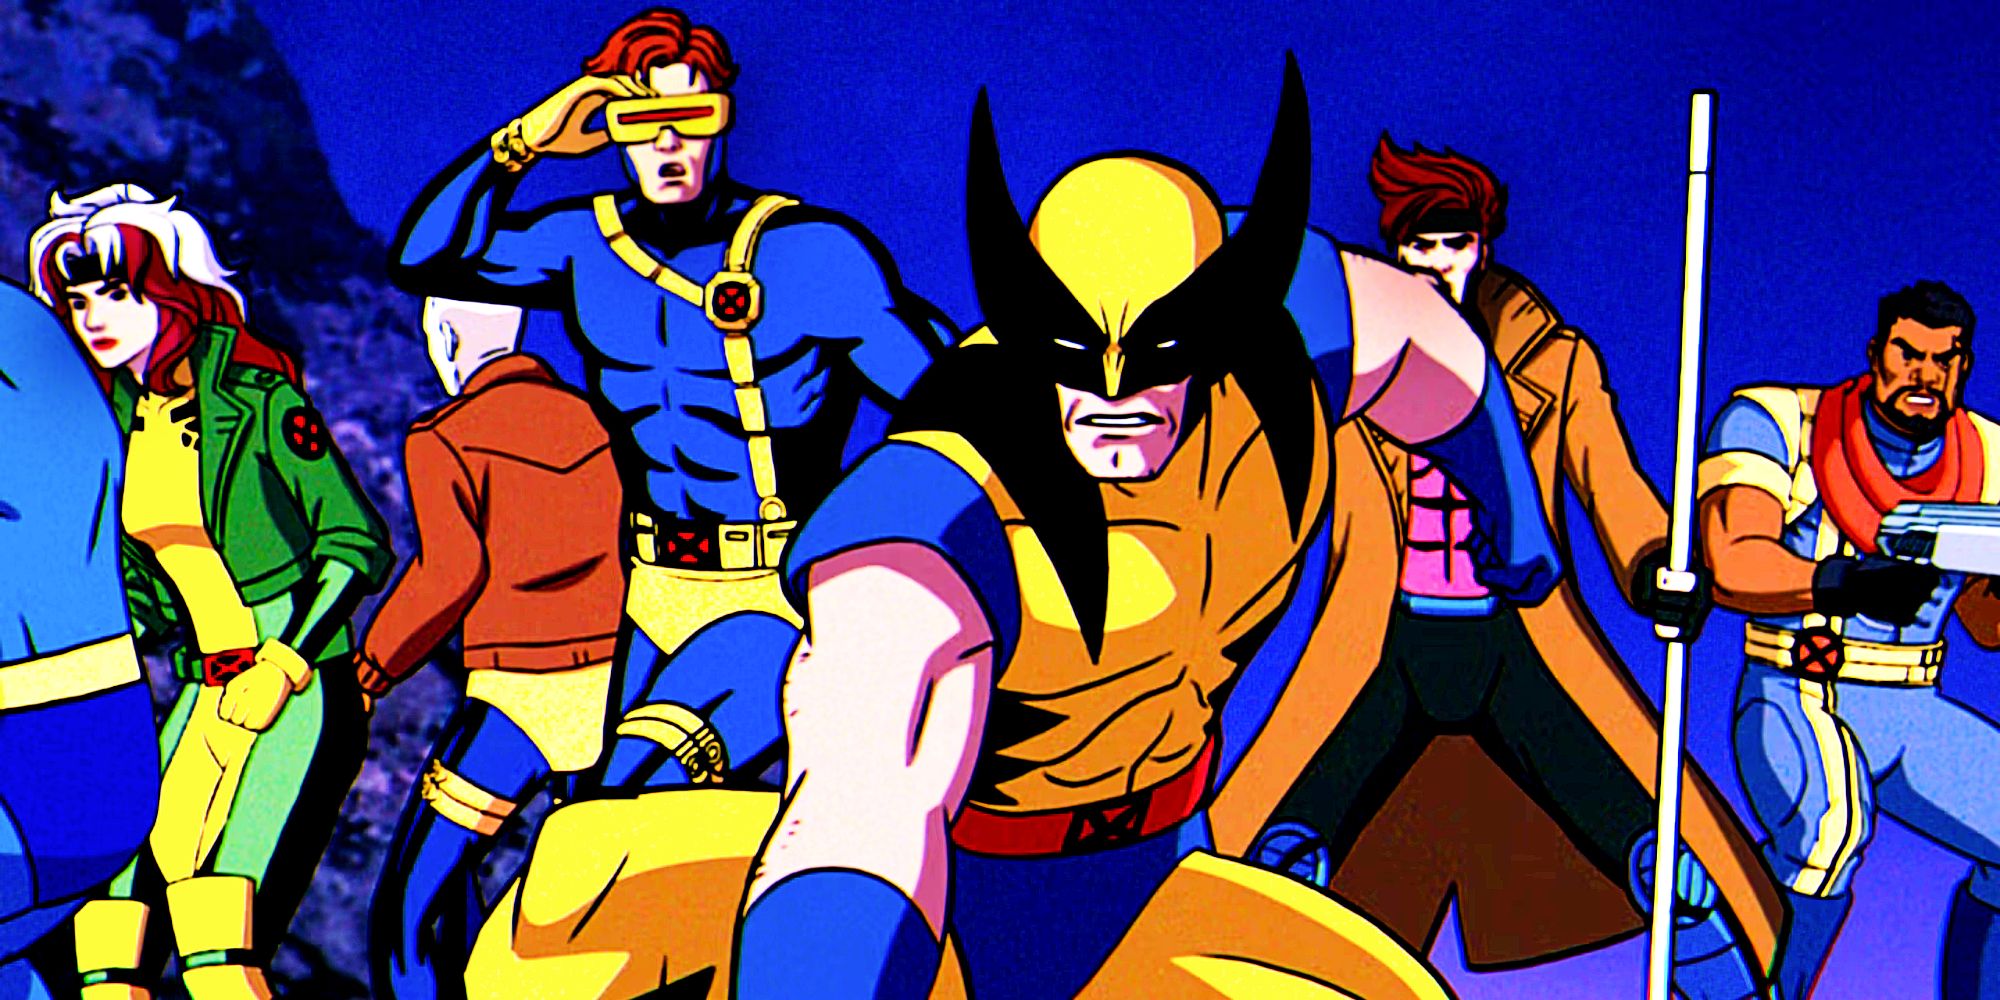 Wolverine and the X-Men Team in X-Men 97 The Animated Series.